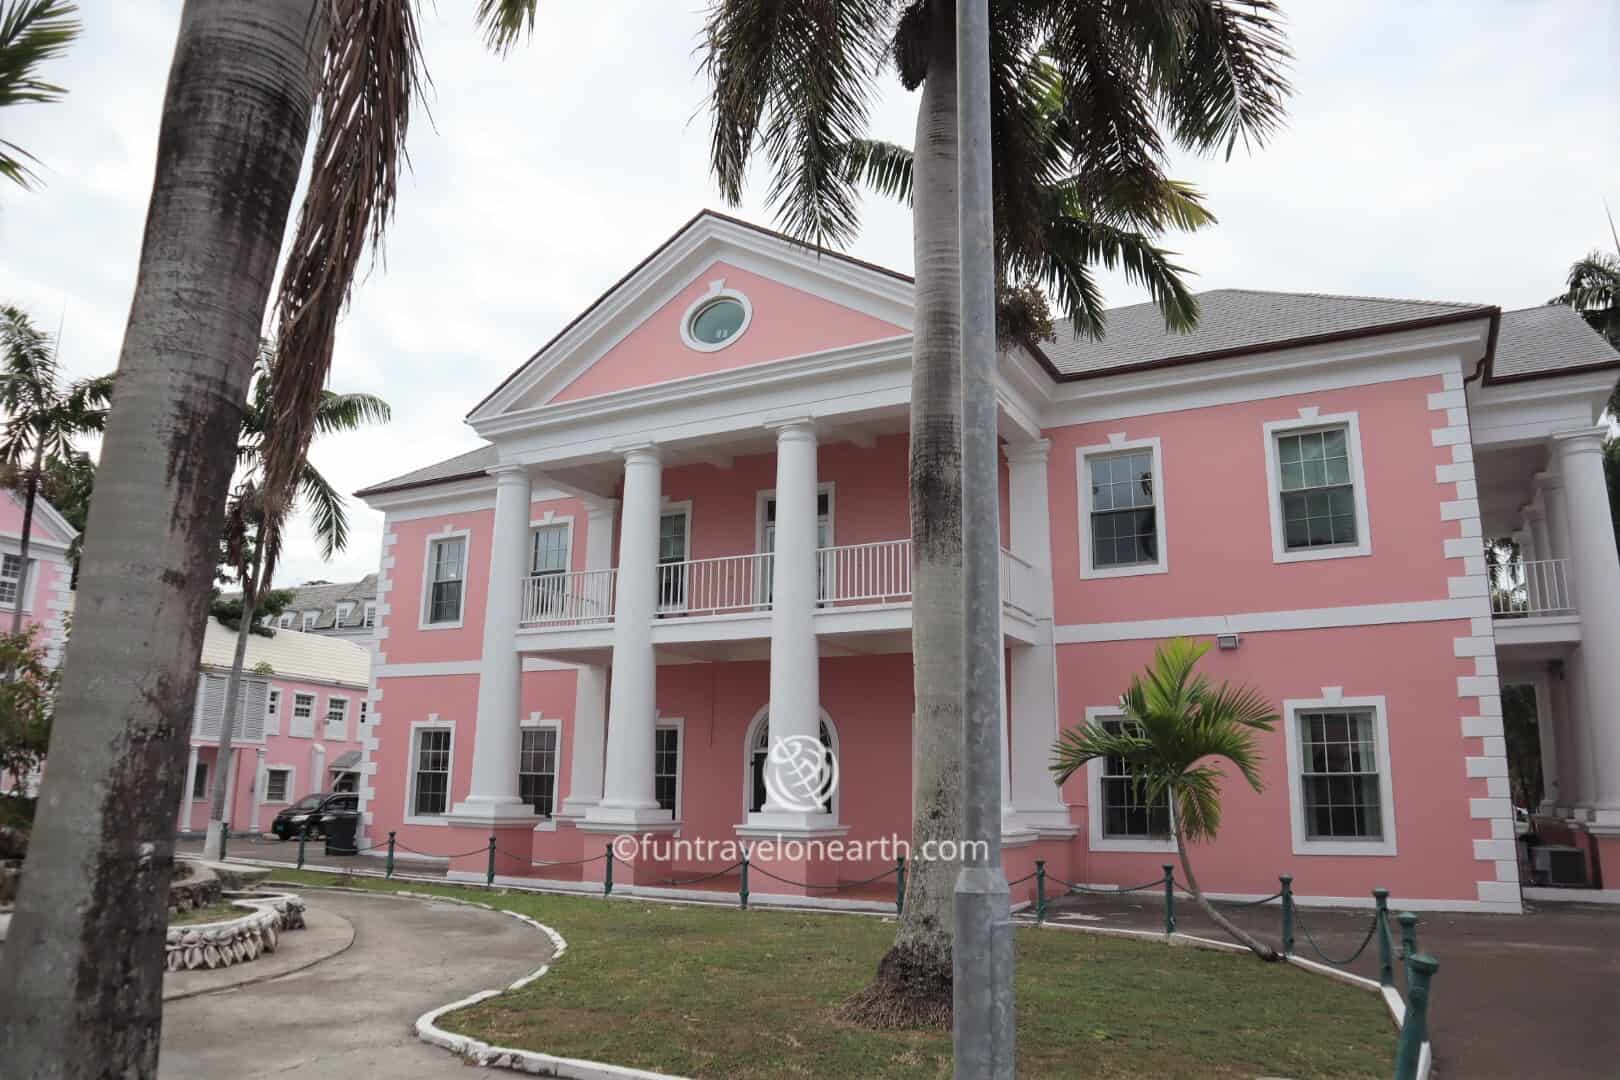 The Supreme Court Of The Bahamas